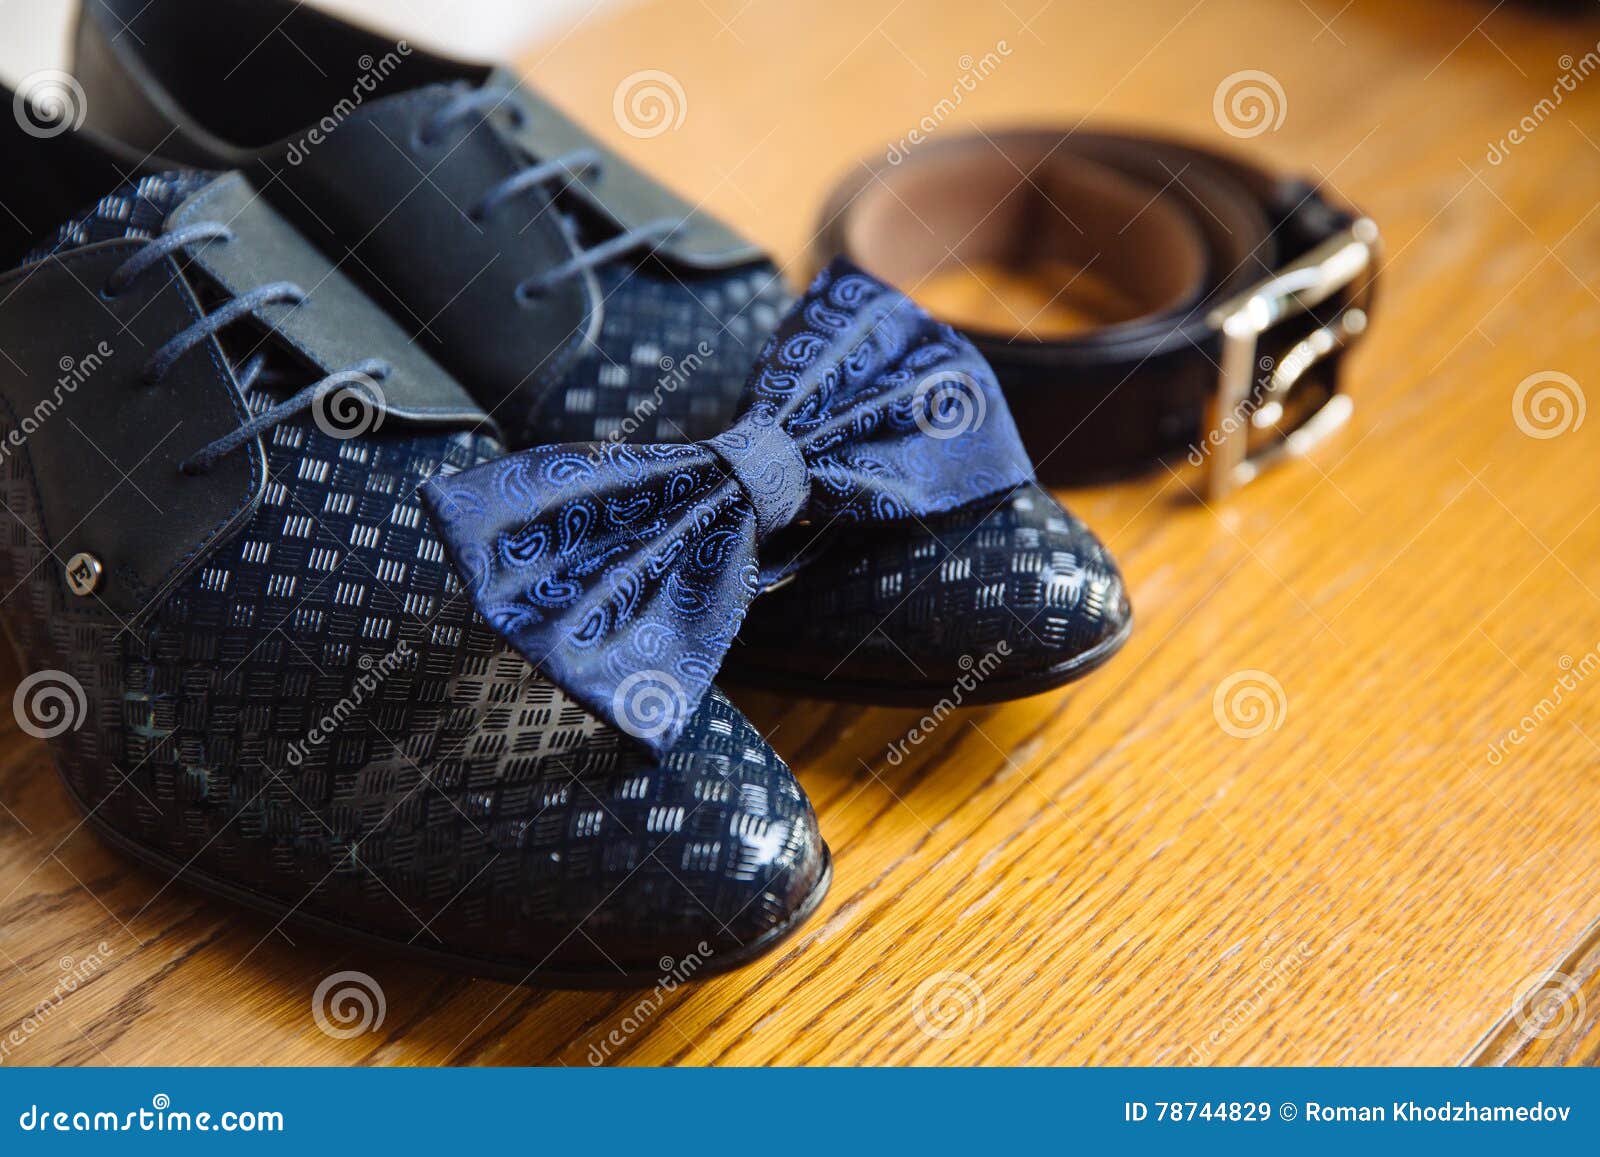 Men S Accessories, Bow-tie, Shoes, Strap on the Table Stock Image ...